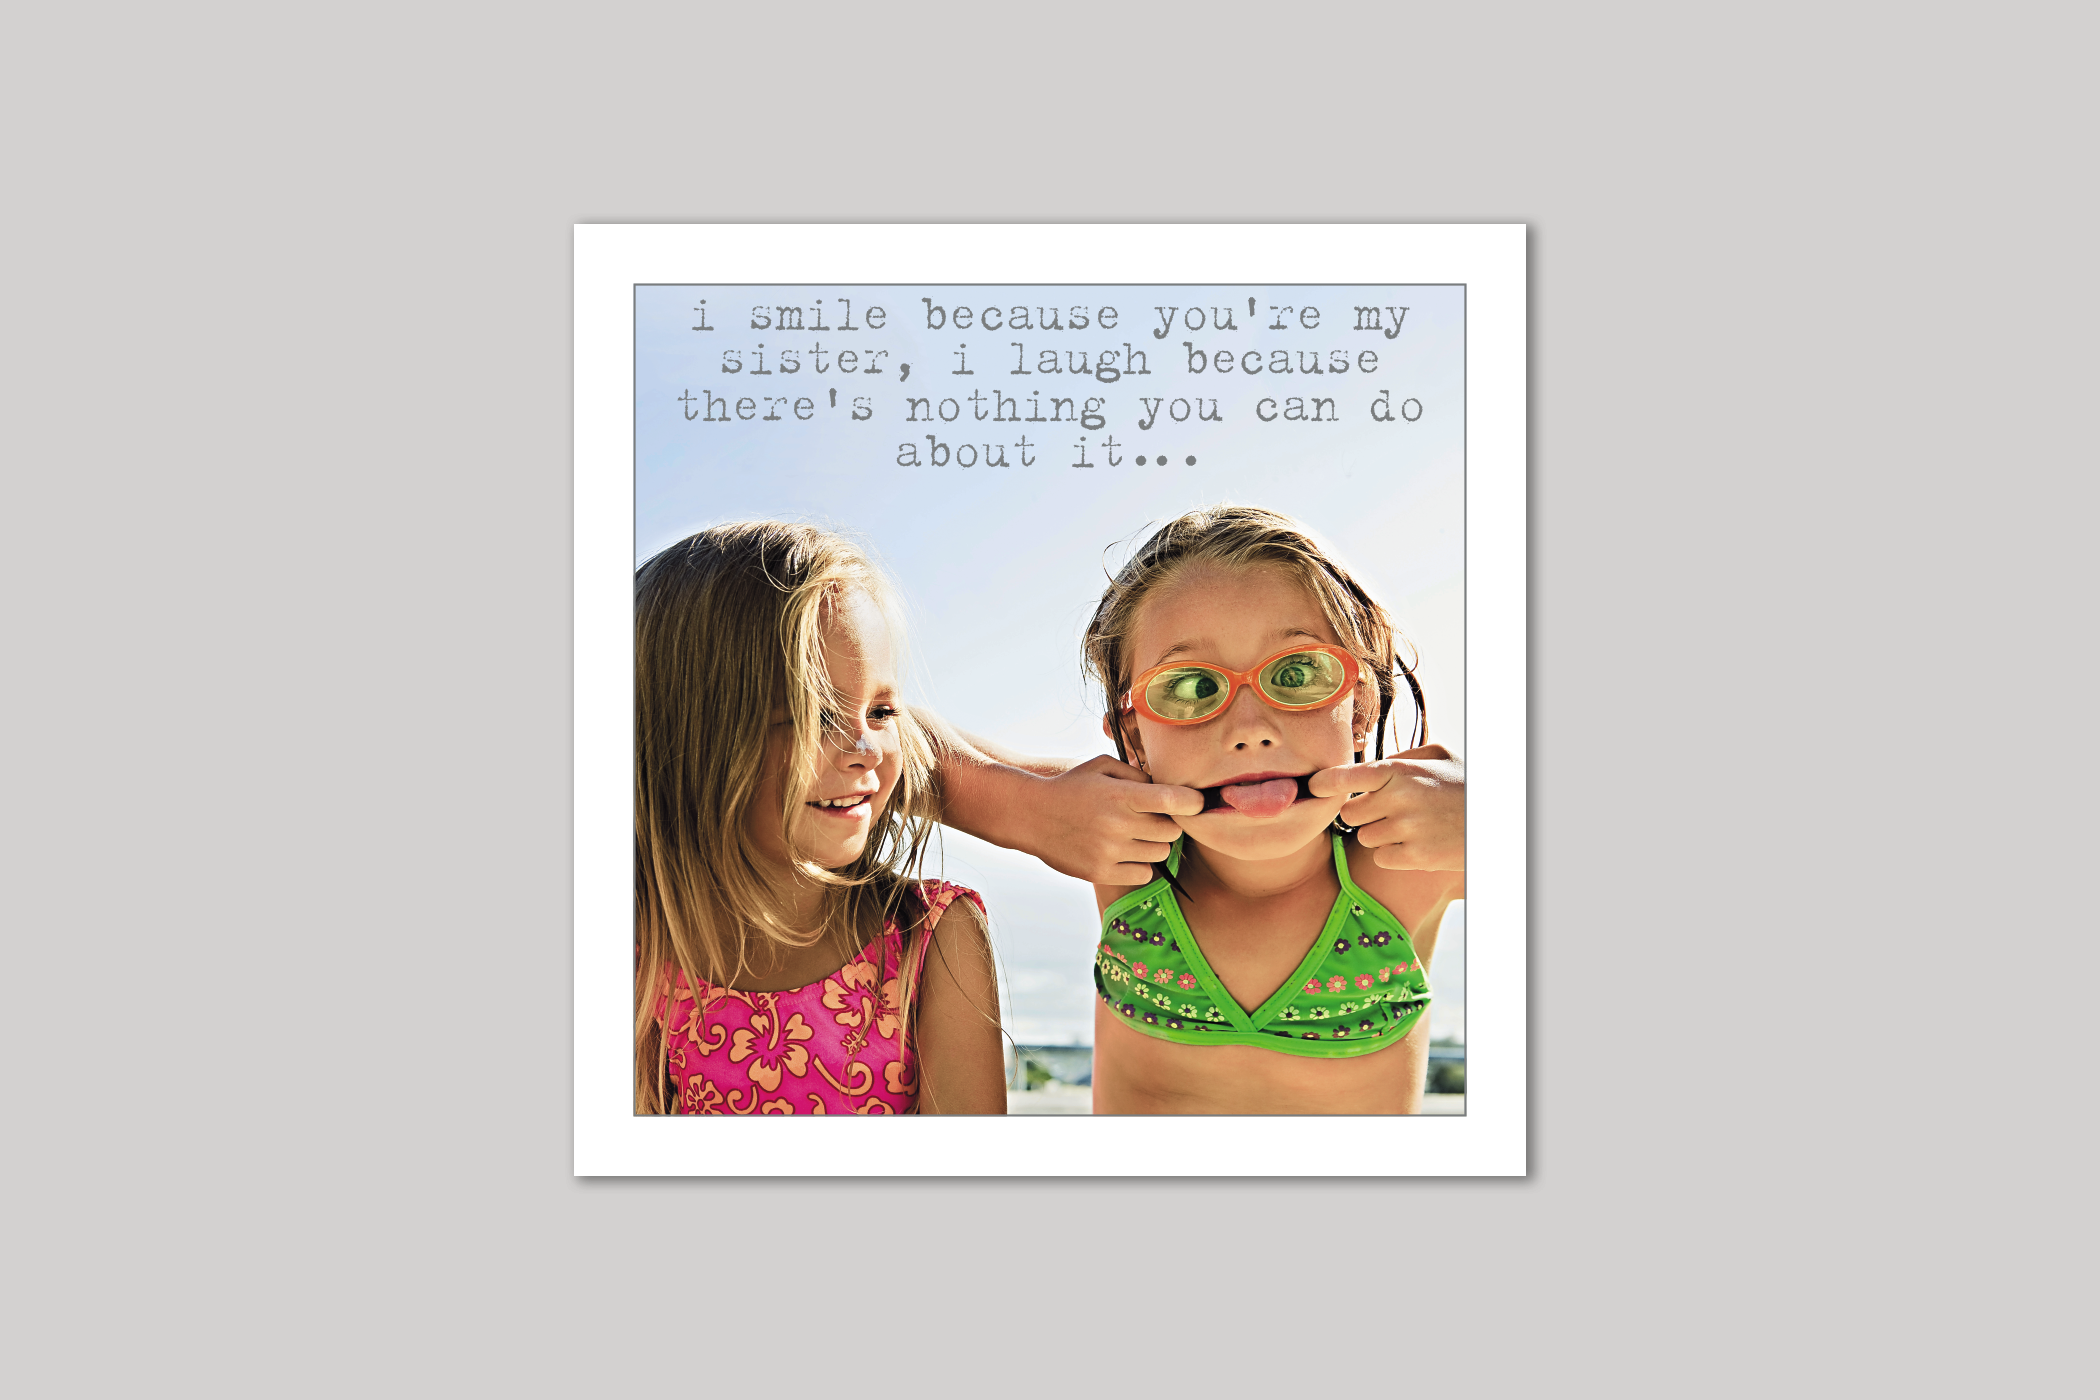 Nothing You Can Do sister card from Life Is Sweet range of greeting cards by Icon.